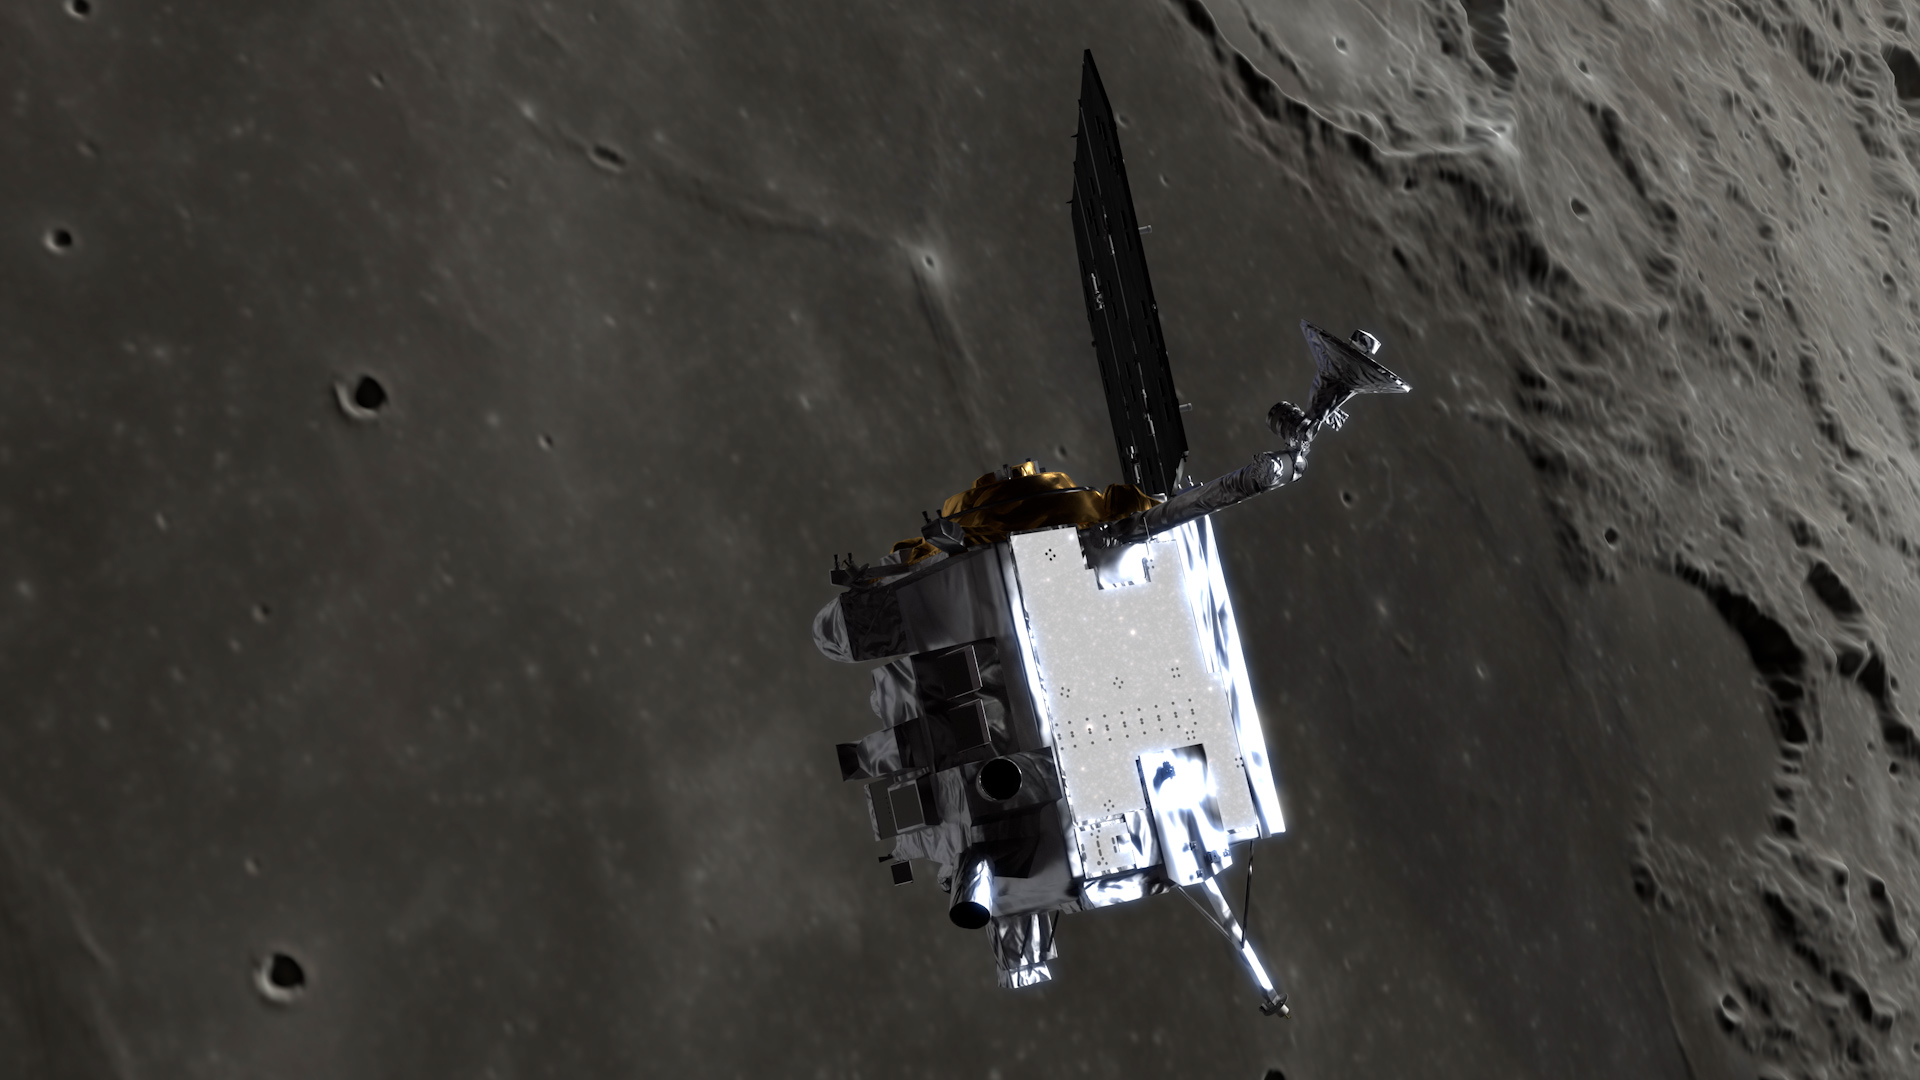 As the LRO mission celebrates 13 years orbiting the Moon, we look to what tasks it will take on in its extended mission phase (ESM5).Music provided by Universal Production Music: "We're Getting Started" - Frederick Kron; "Whoop It Up" - Paul Joseph Smith.